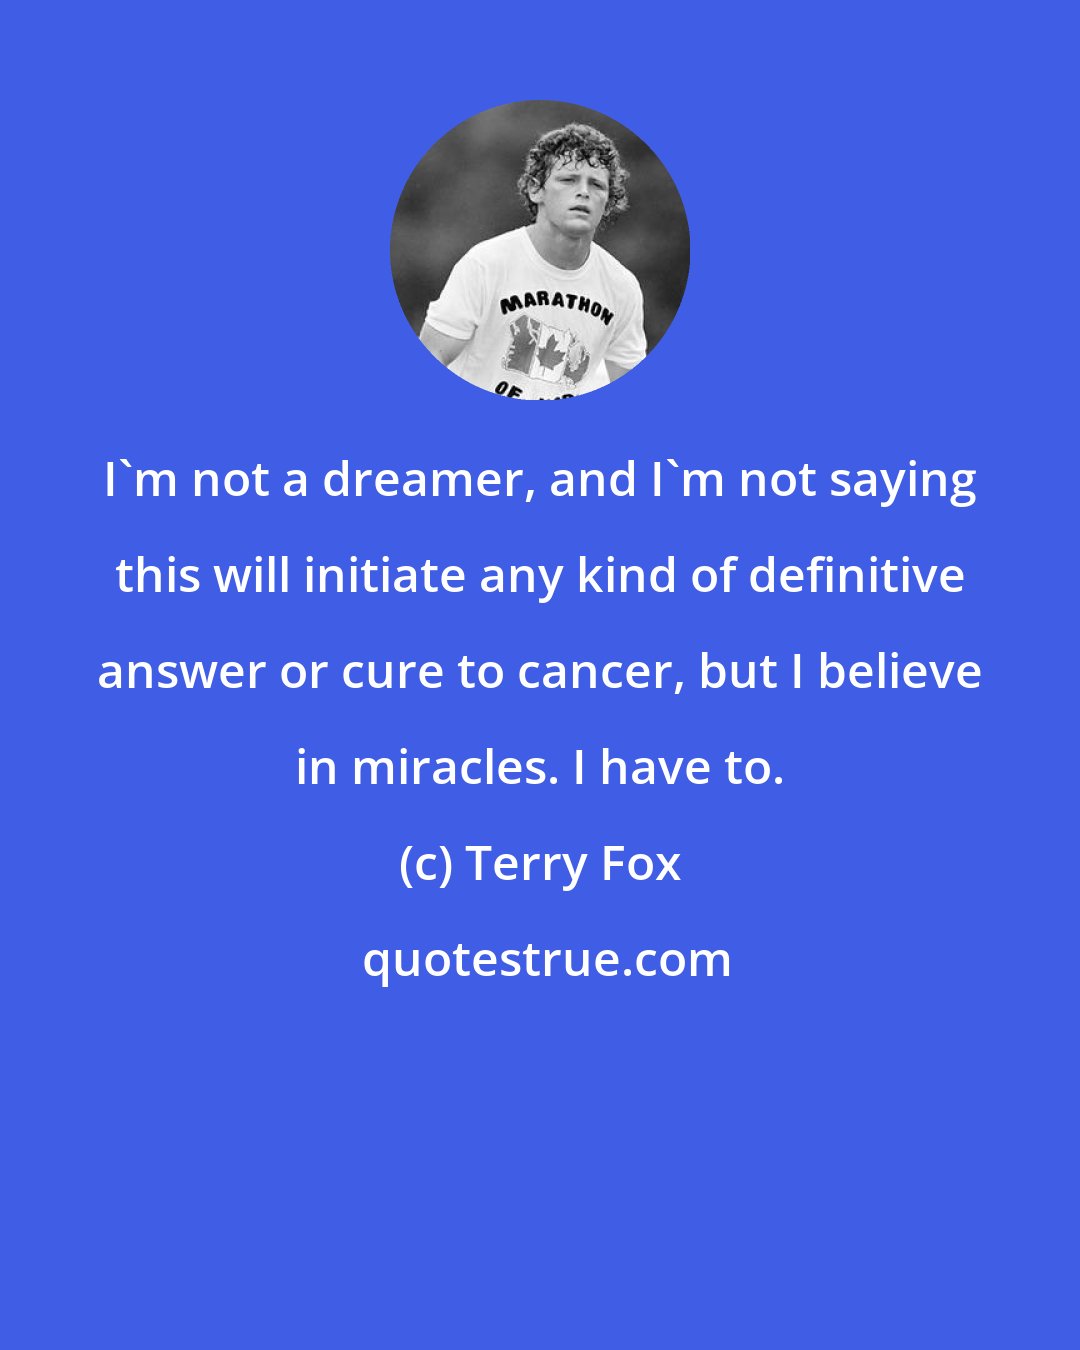 Terry Fox: I'm not a dreamer, and I'm not saying this will initiate any kind of definitive answer or cure to cancer, but I believe in miracles. I have to.